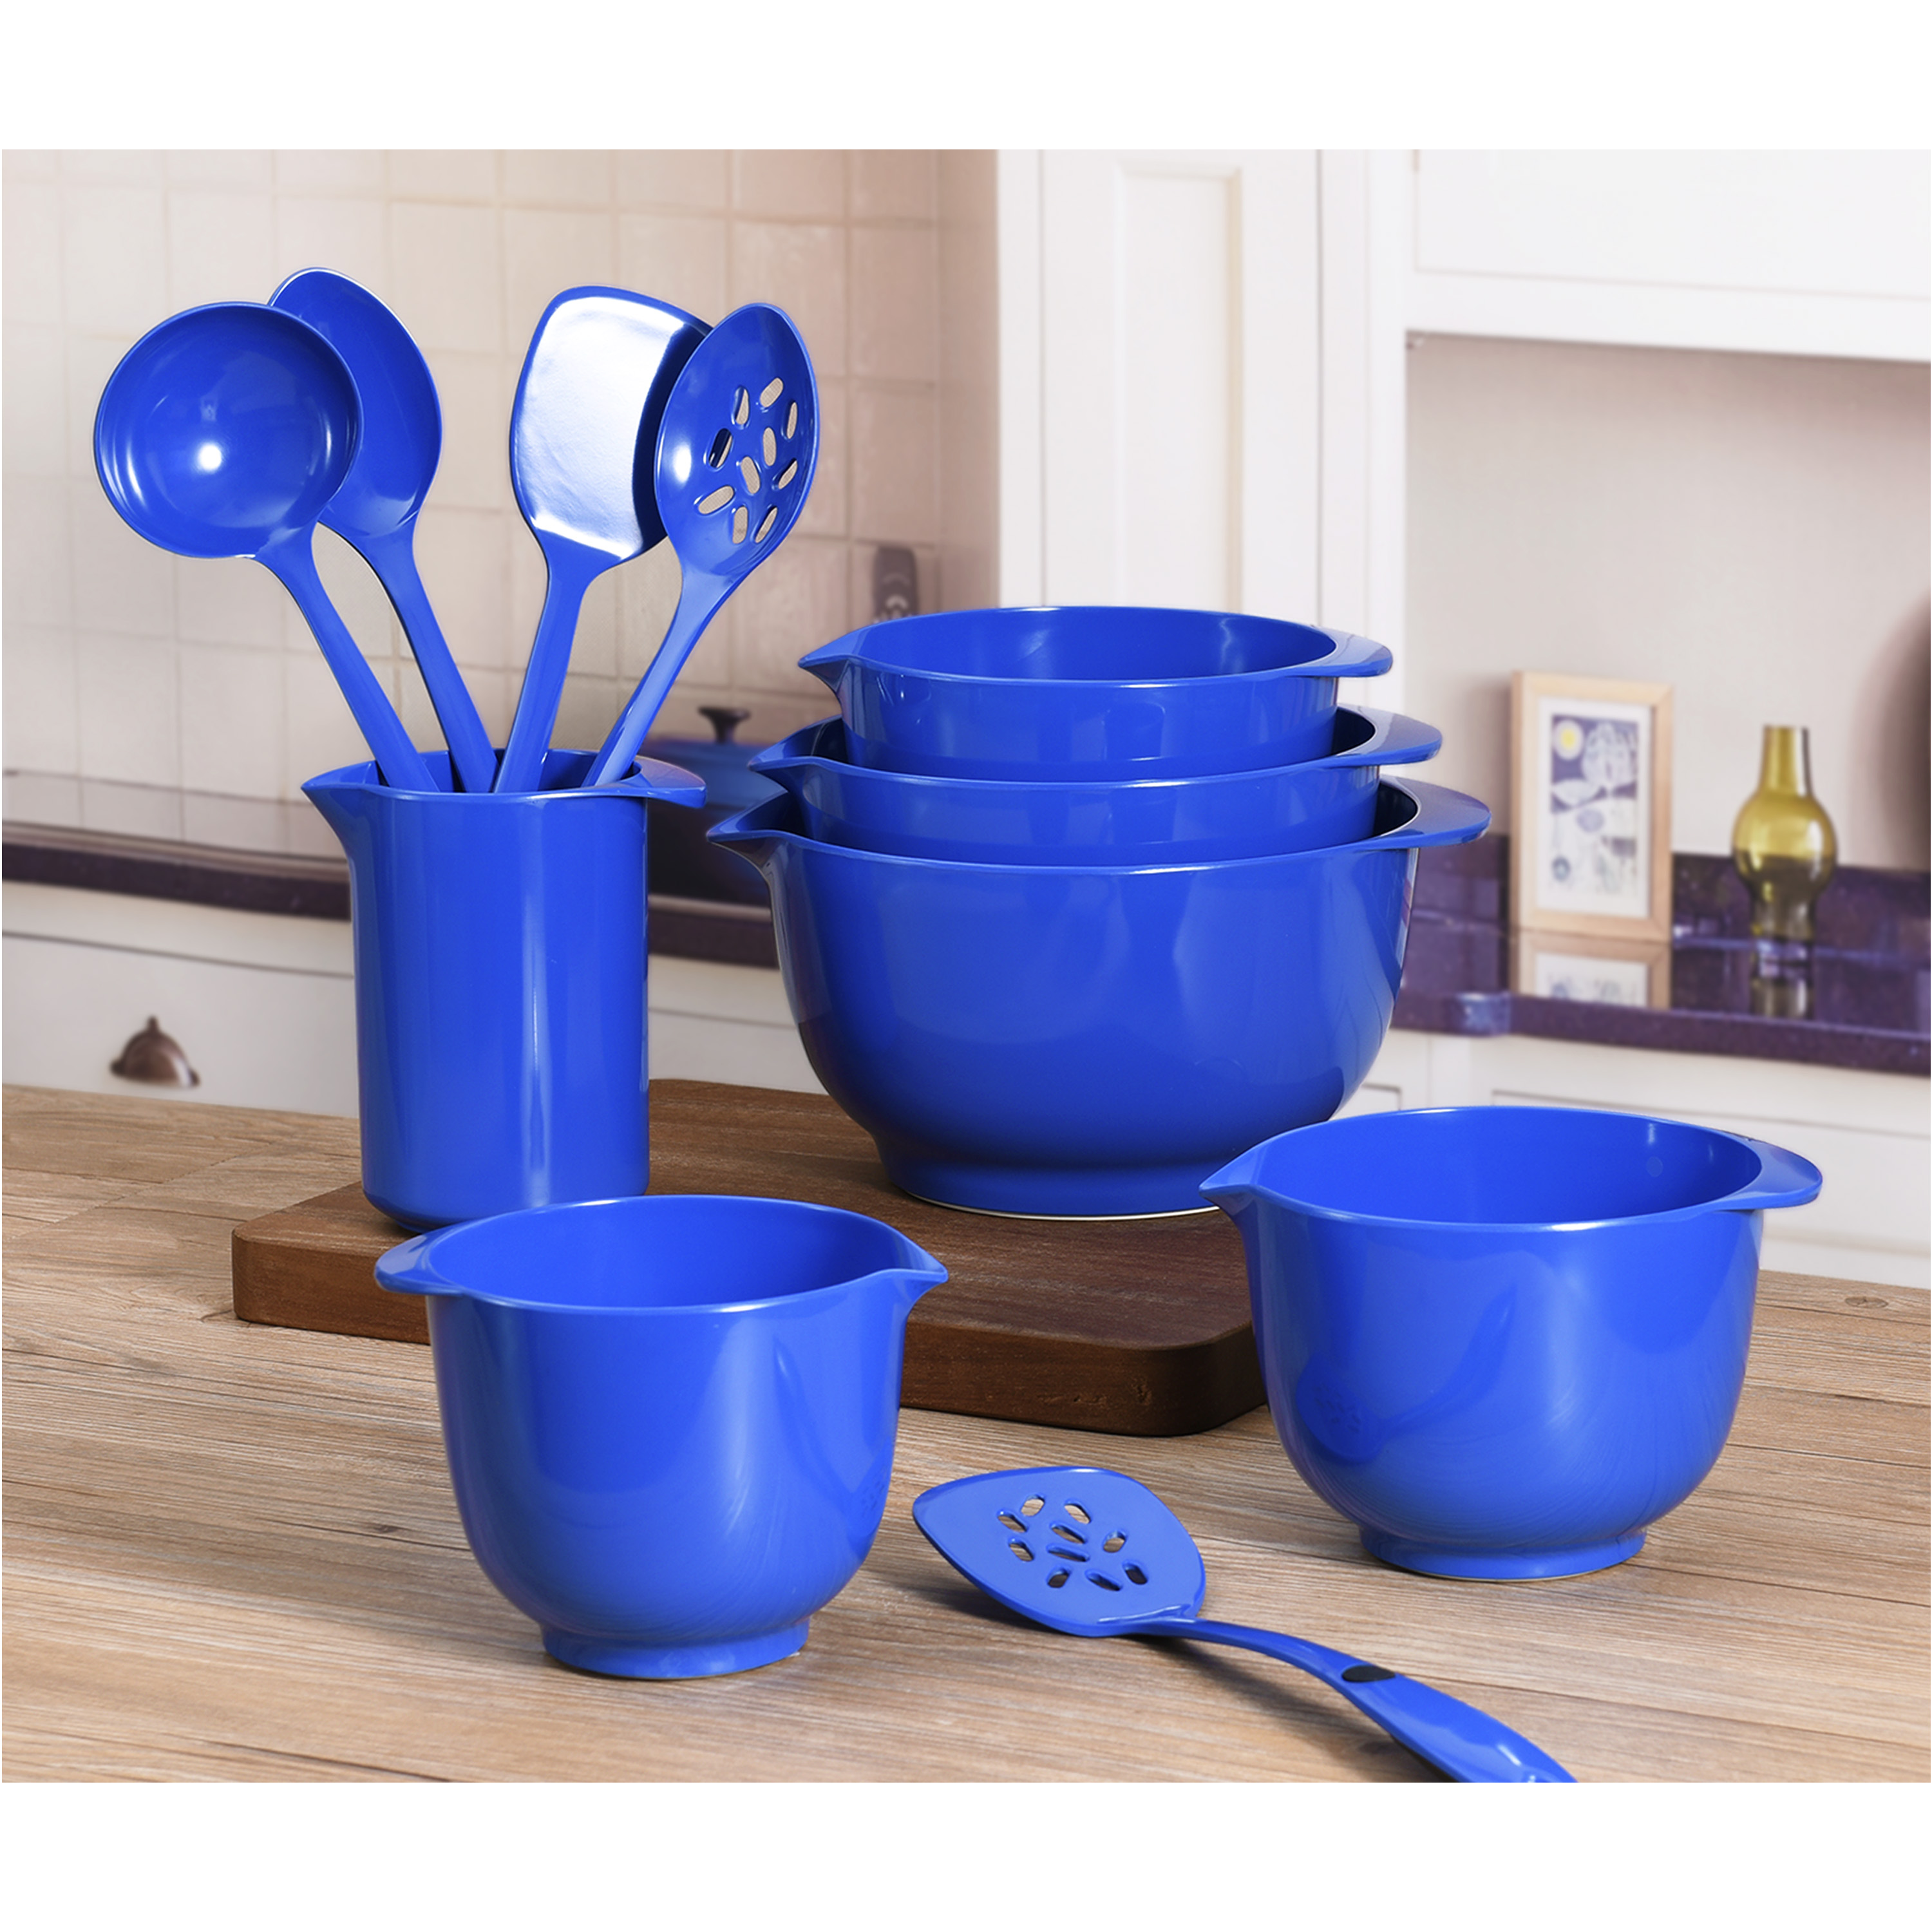 Discontinued - Last Chance Clearance! Mainstays 11PC Melamine Mixing Bowl and Utensil Set- Blue - image 4 of 4